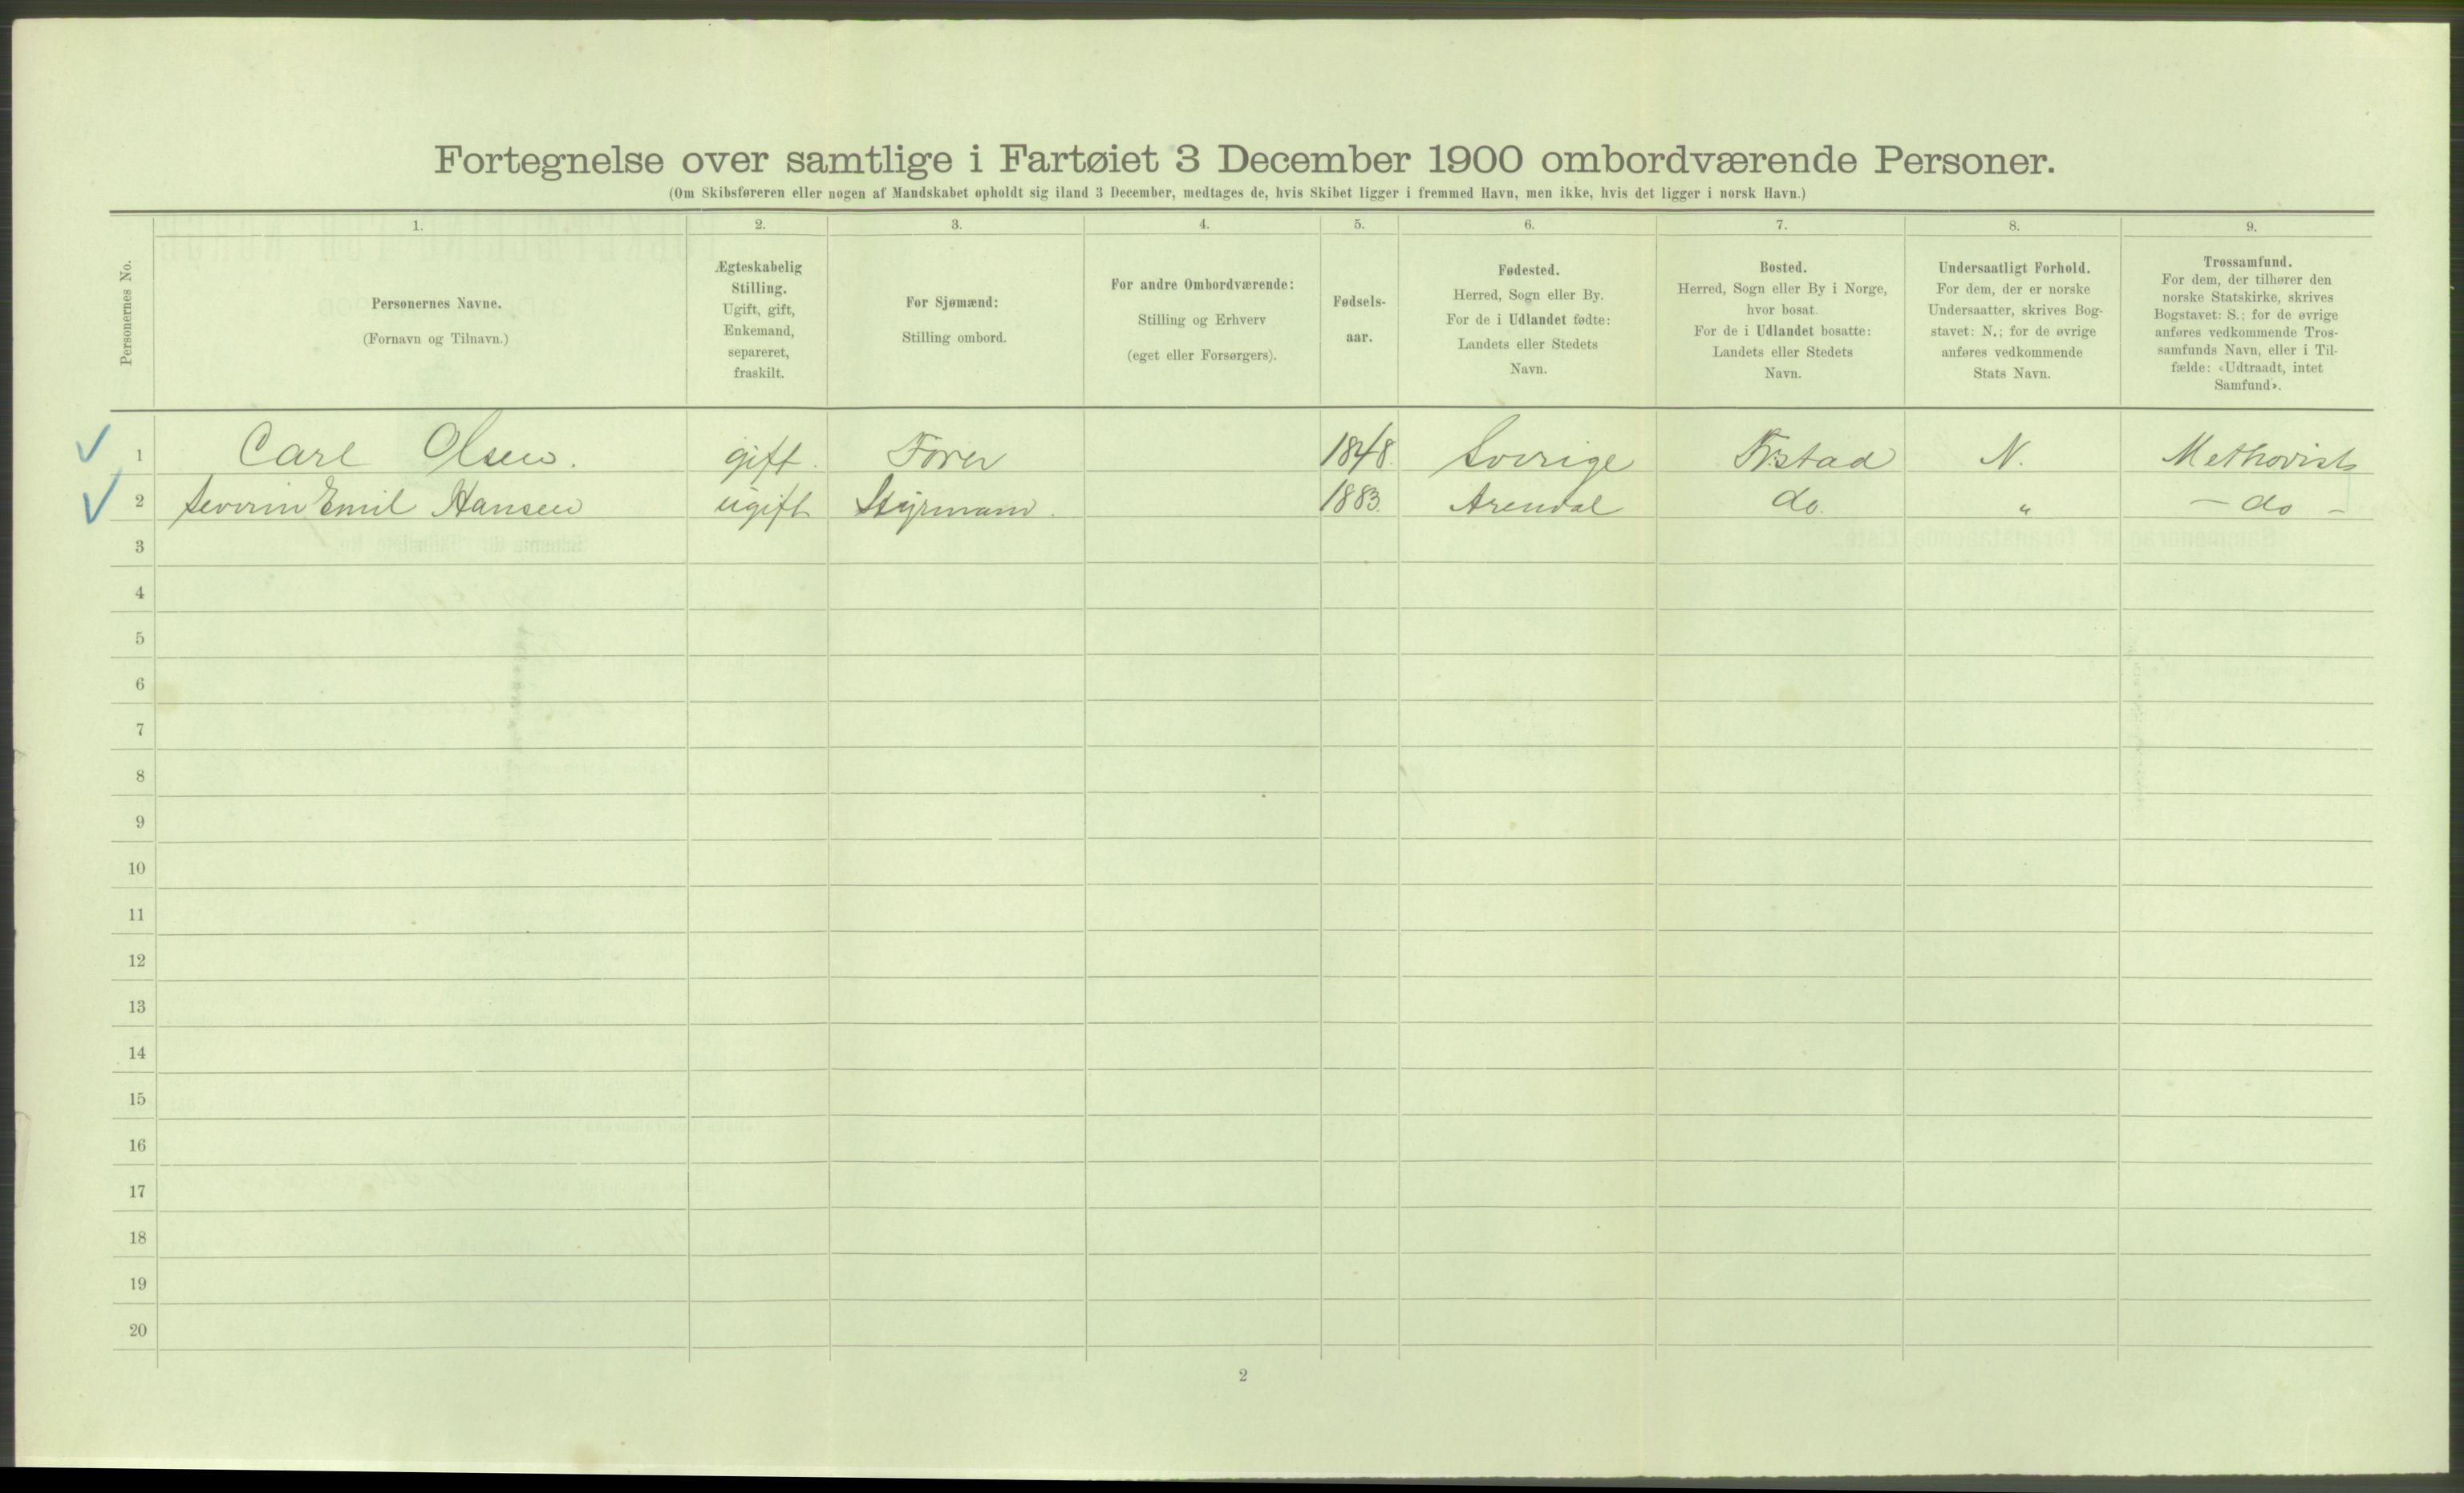 RA, 1900 Census - ship lists from ships in Norwegian harbours, harbours abroad and at sea, 1900, p. 4